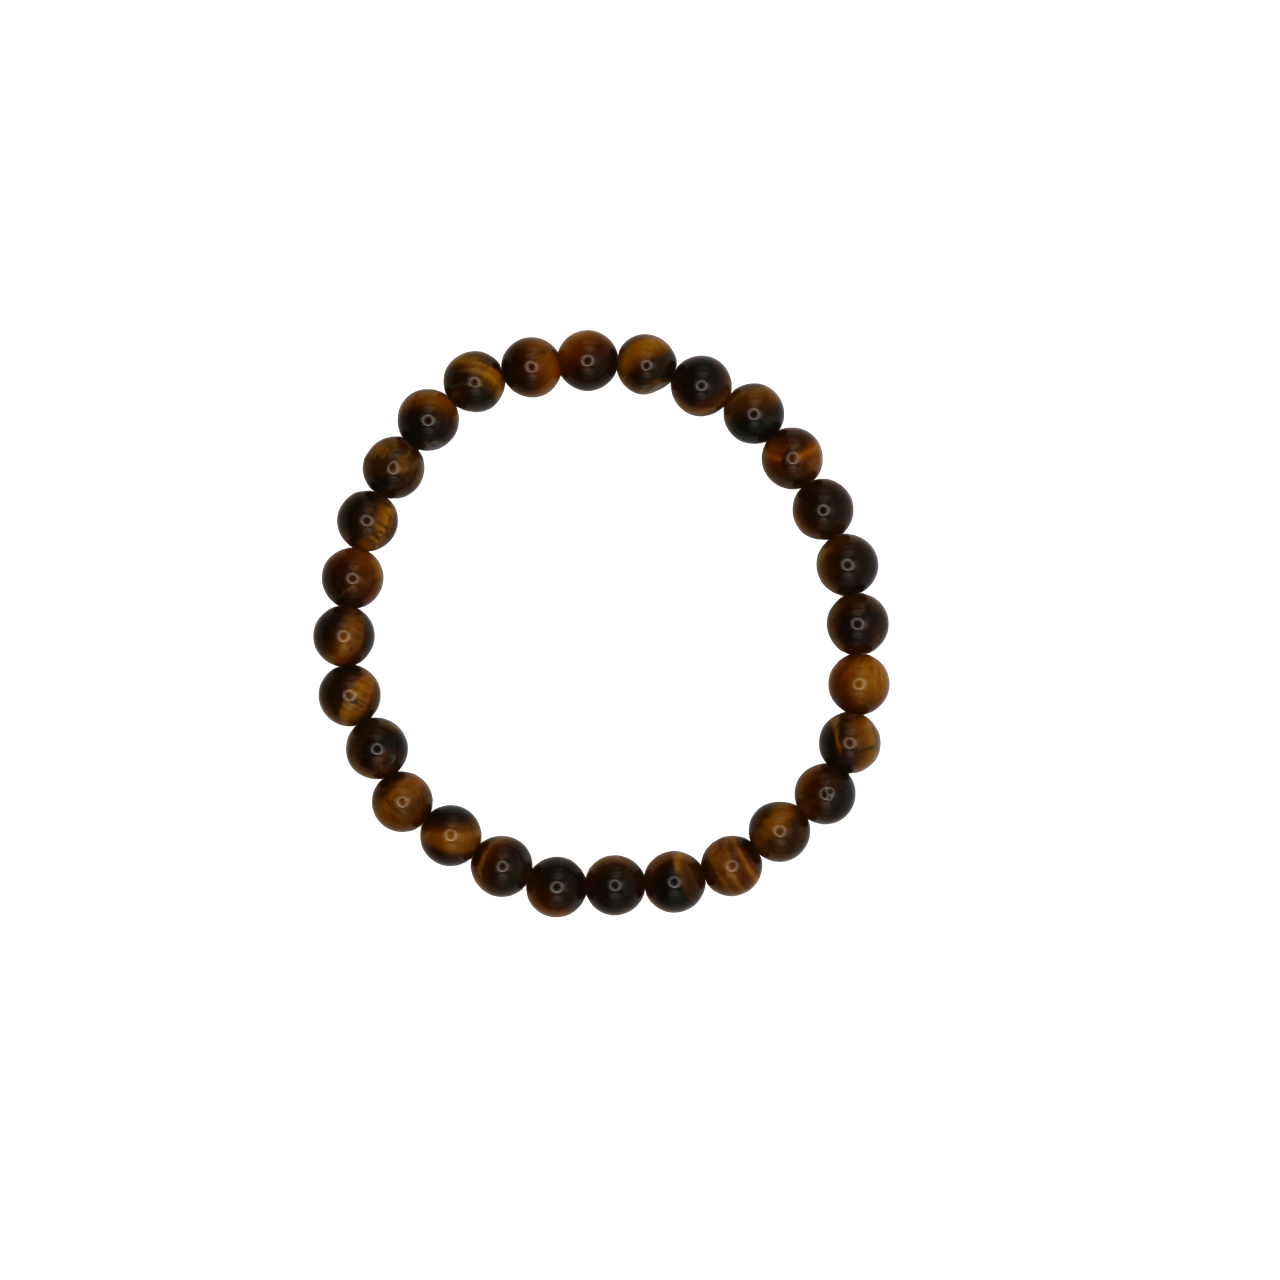 Tiger Eye crystal bead bracelet with 6mm size beads